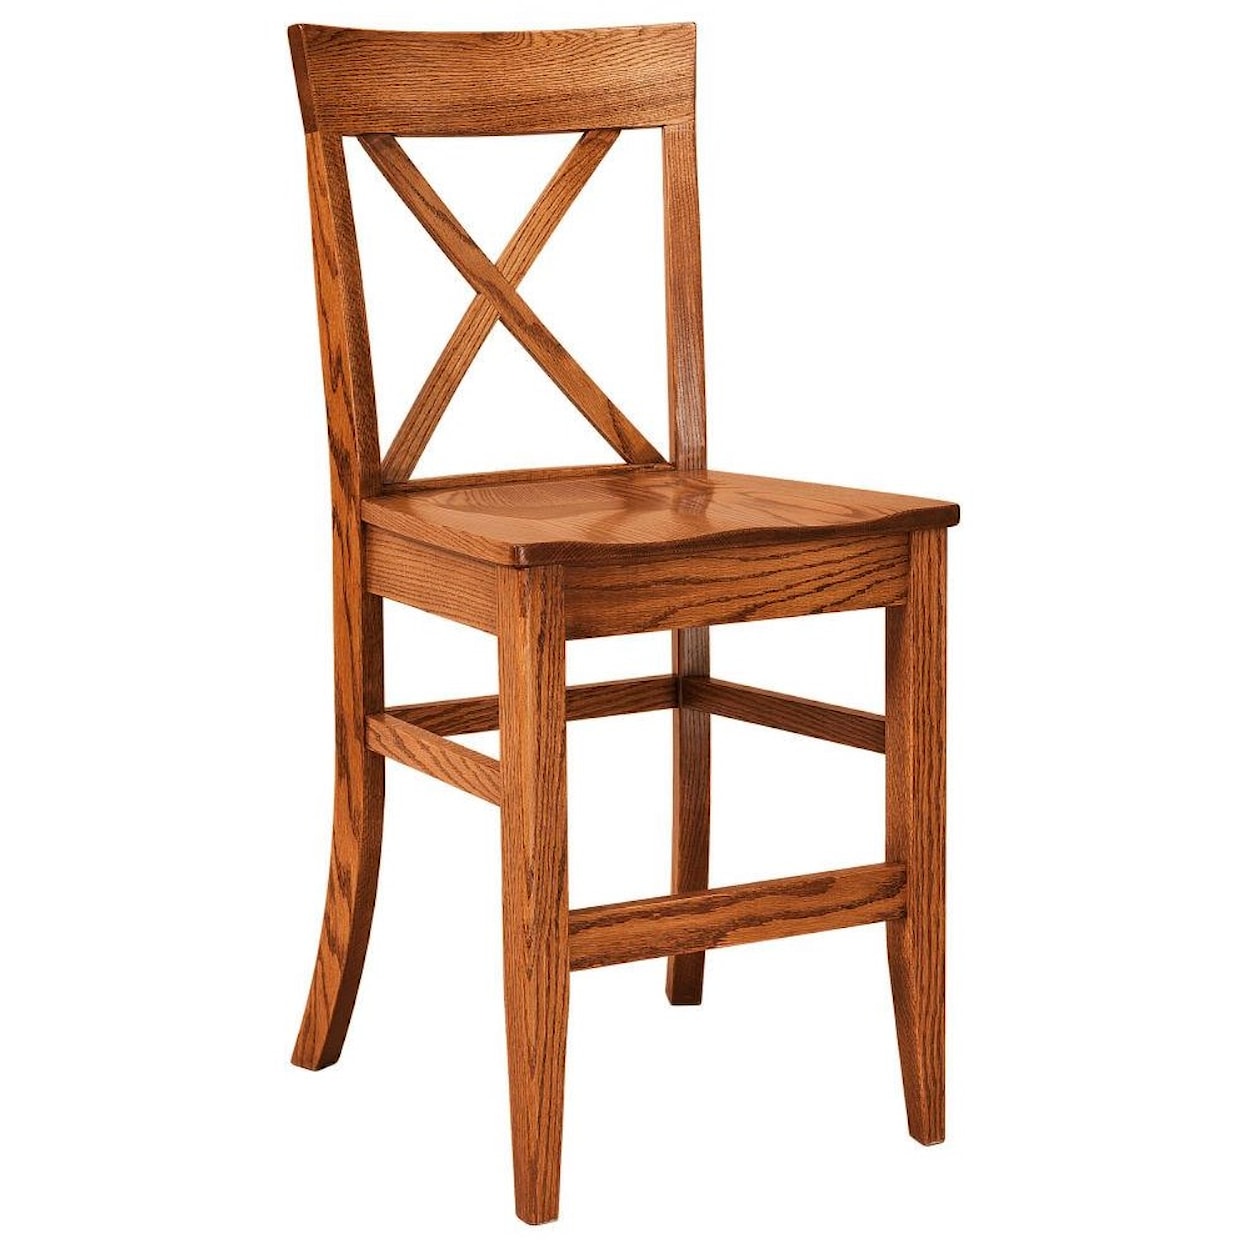 F&N Woodworking Frontier 30" Stationary Stool